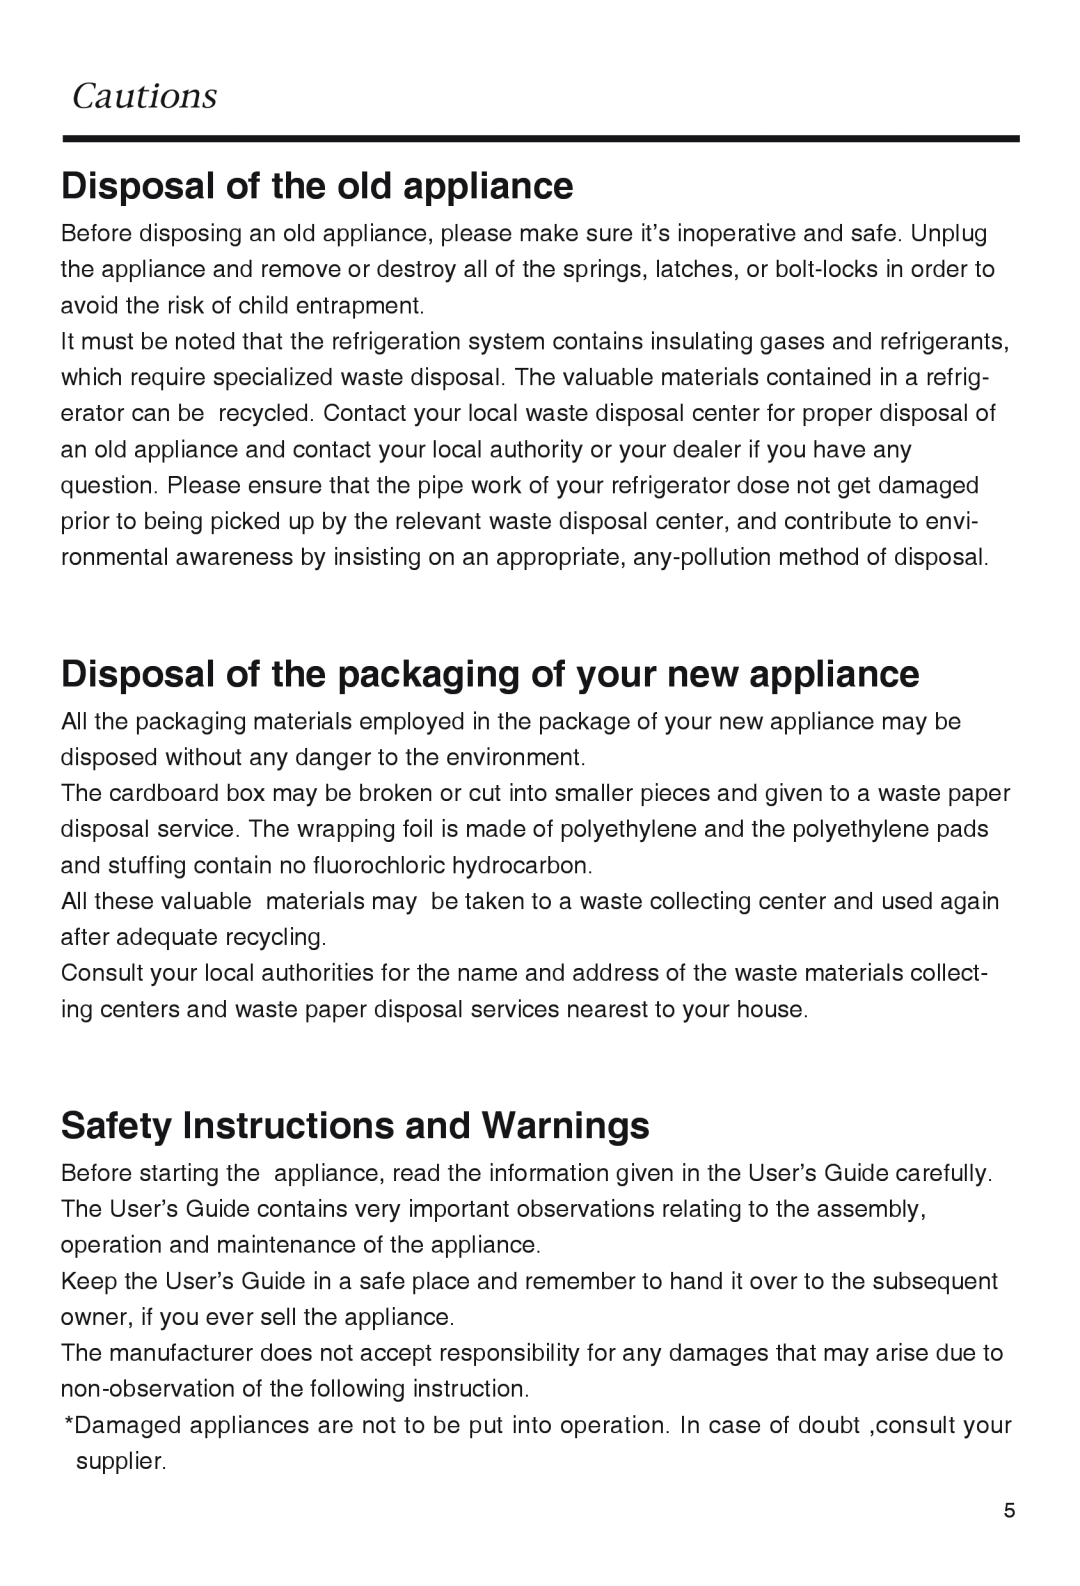 Haier HBR-1301, HBF-1303 manual Disposal of the old appliance, Disposal of the packaging of your new appliance, Cautions 